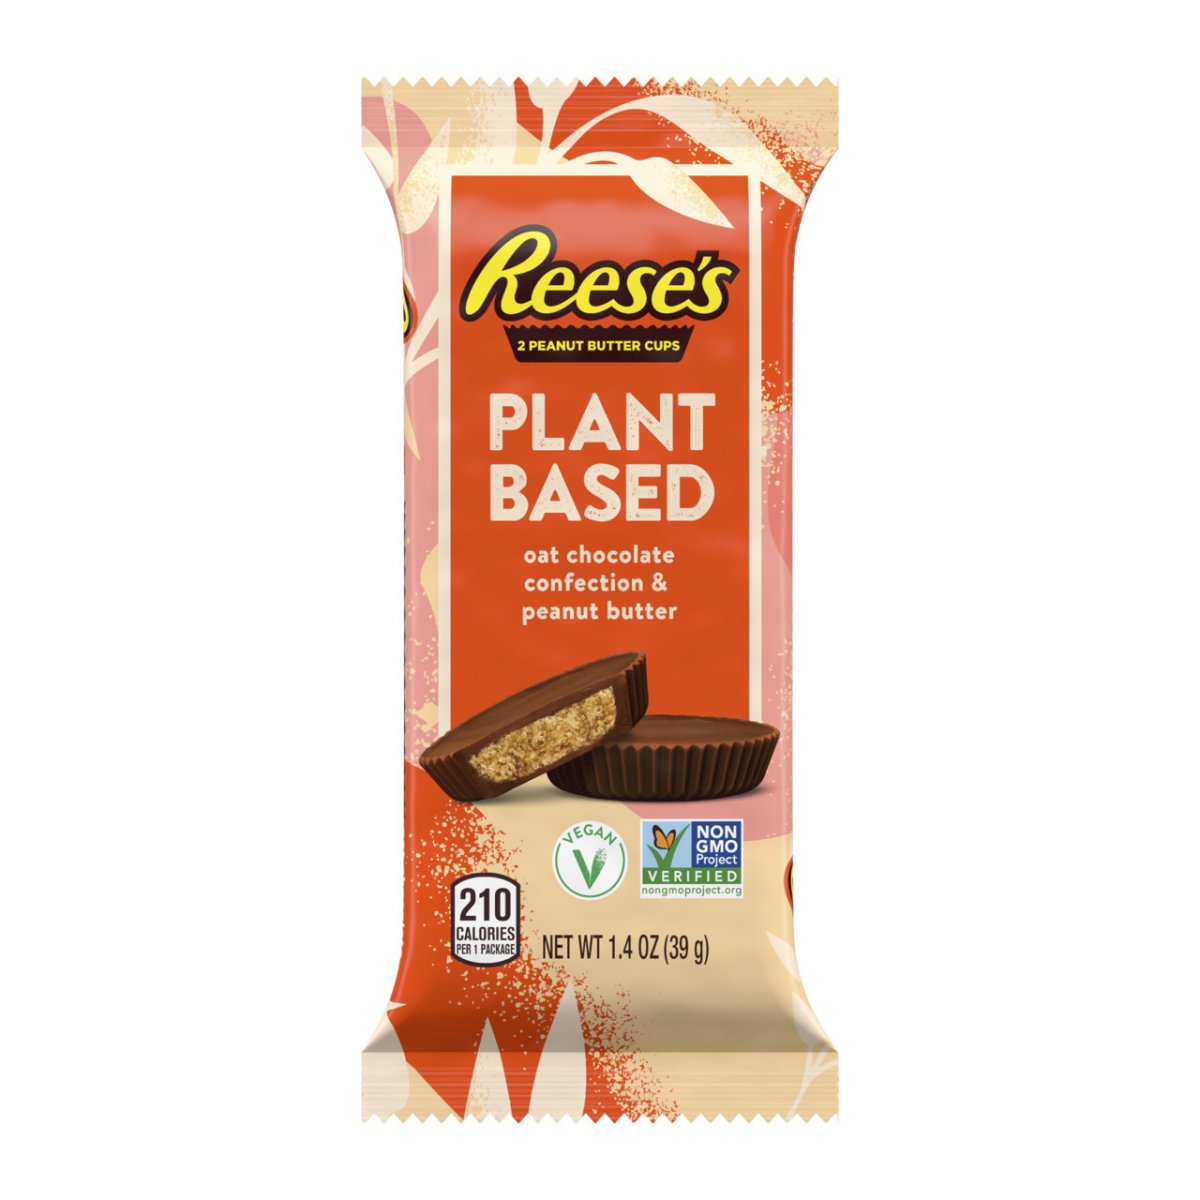 The new candy bar is made with oats instead of milk, Hershey said.